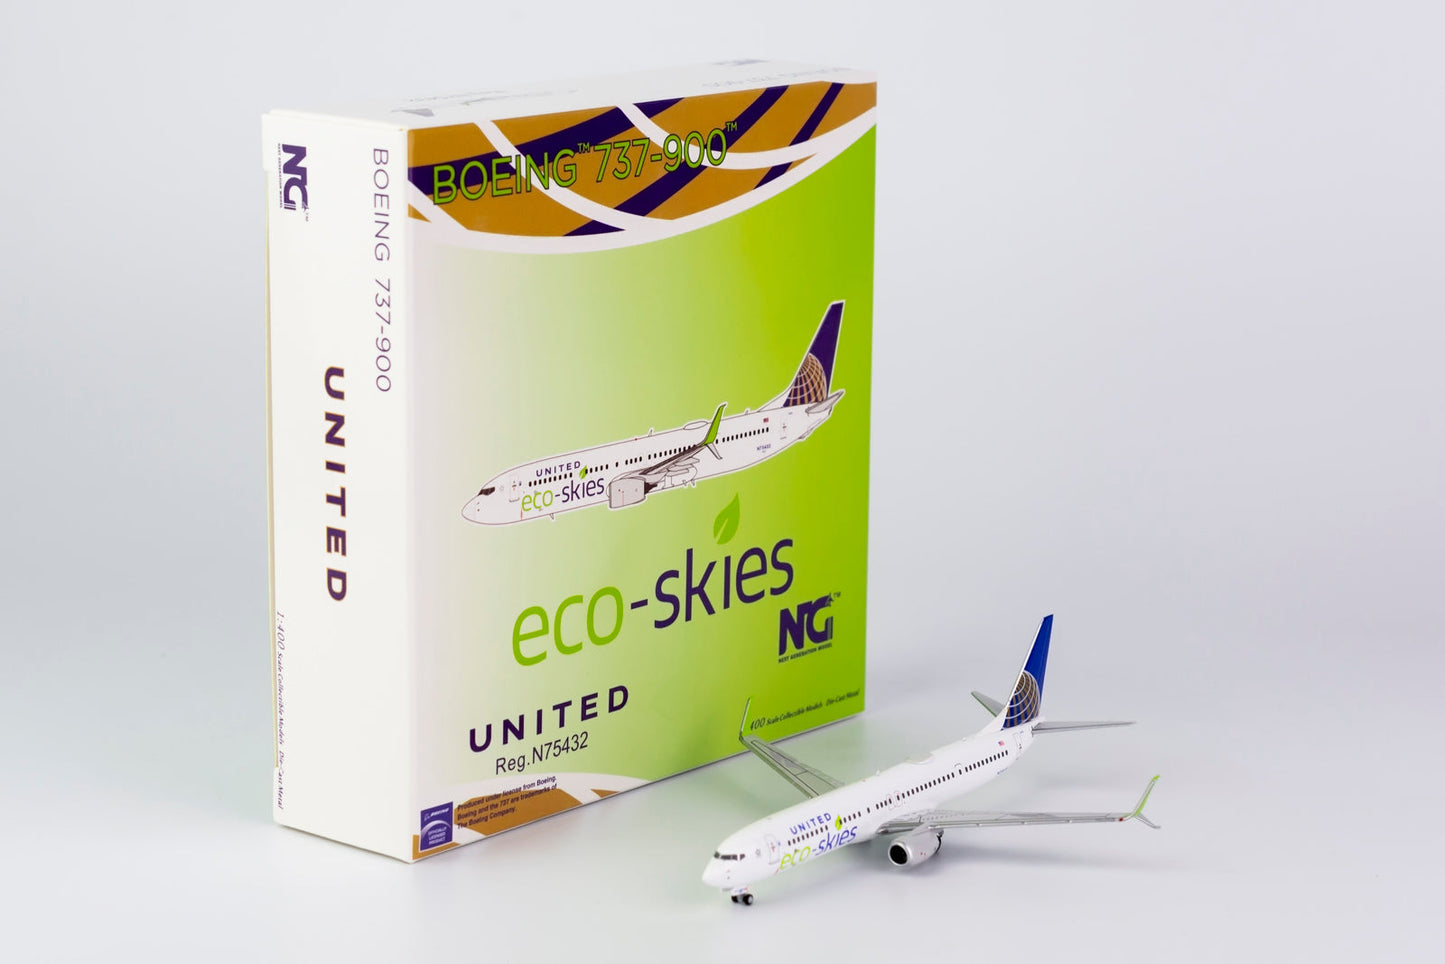 1/400 United Airlines B 737-900ER/w "Special Eco-skies Livery" NG Models 79009s/d1 *Defective model*